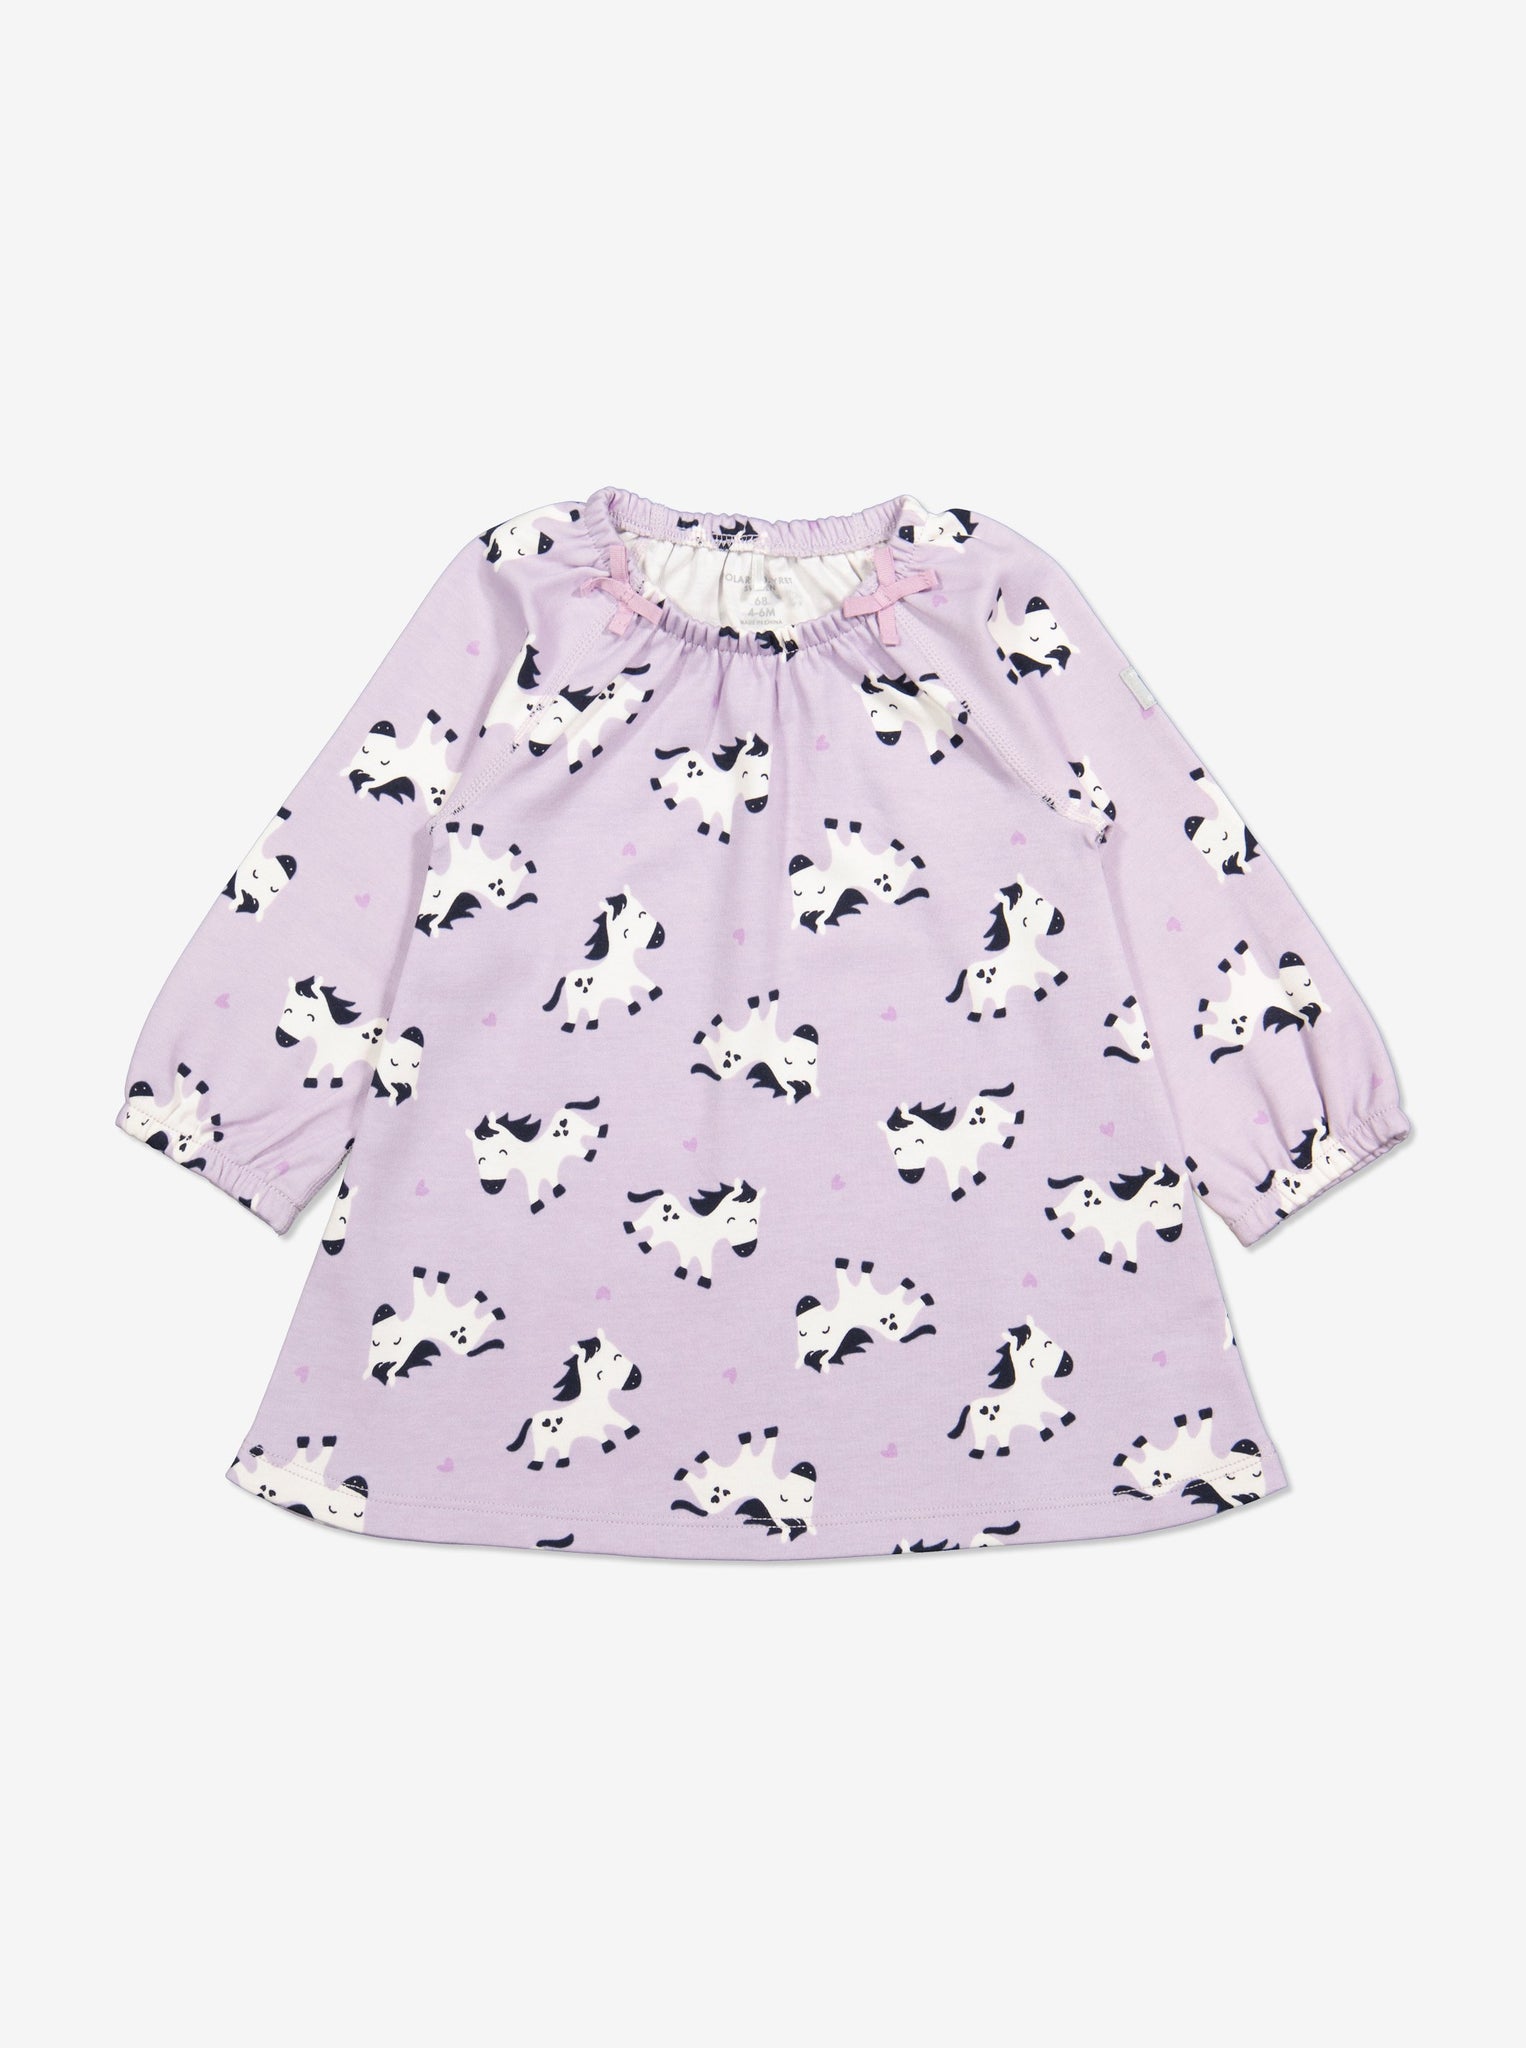  Organic Pink Horse Print Baby Dress from Polarn O. Pyret Kidswear. Made with 100% organic cotton.